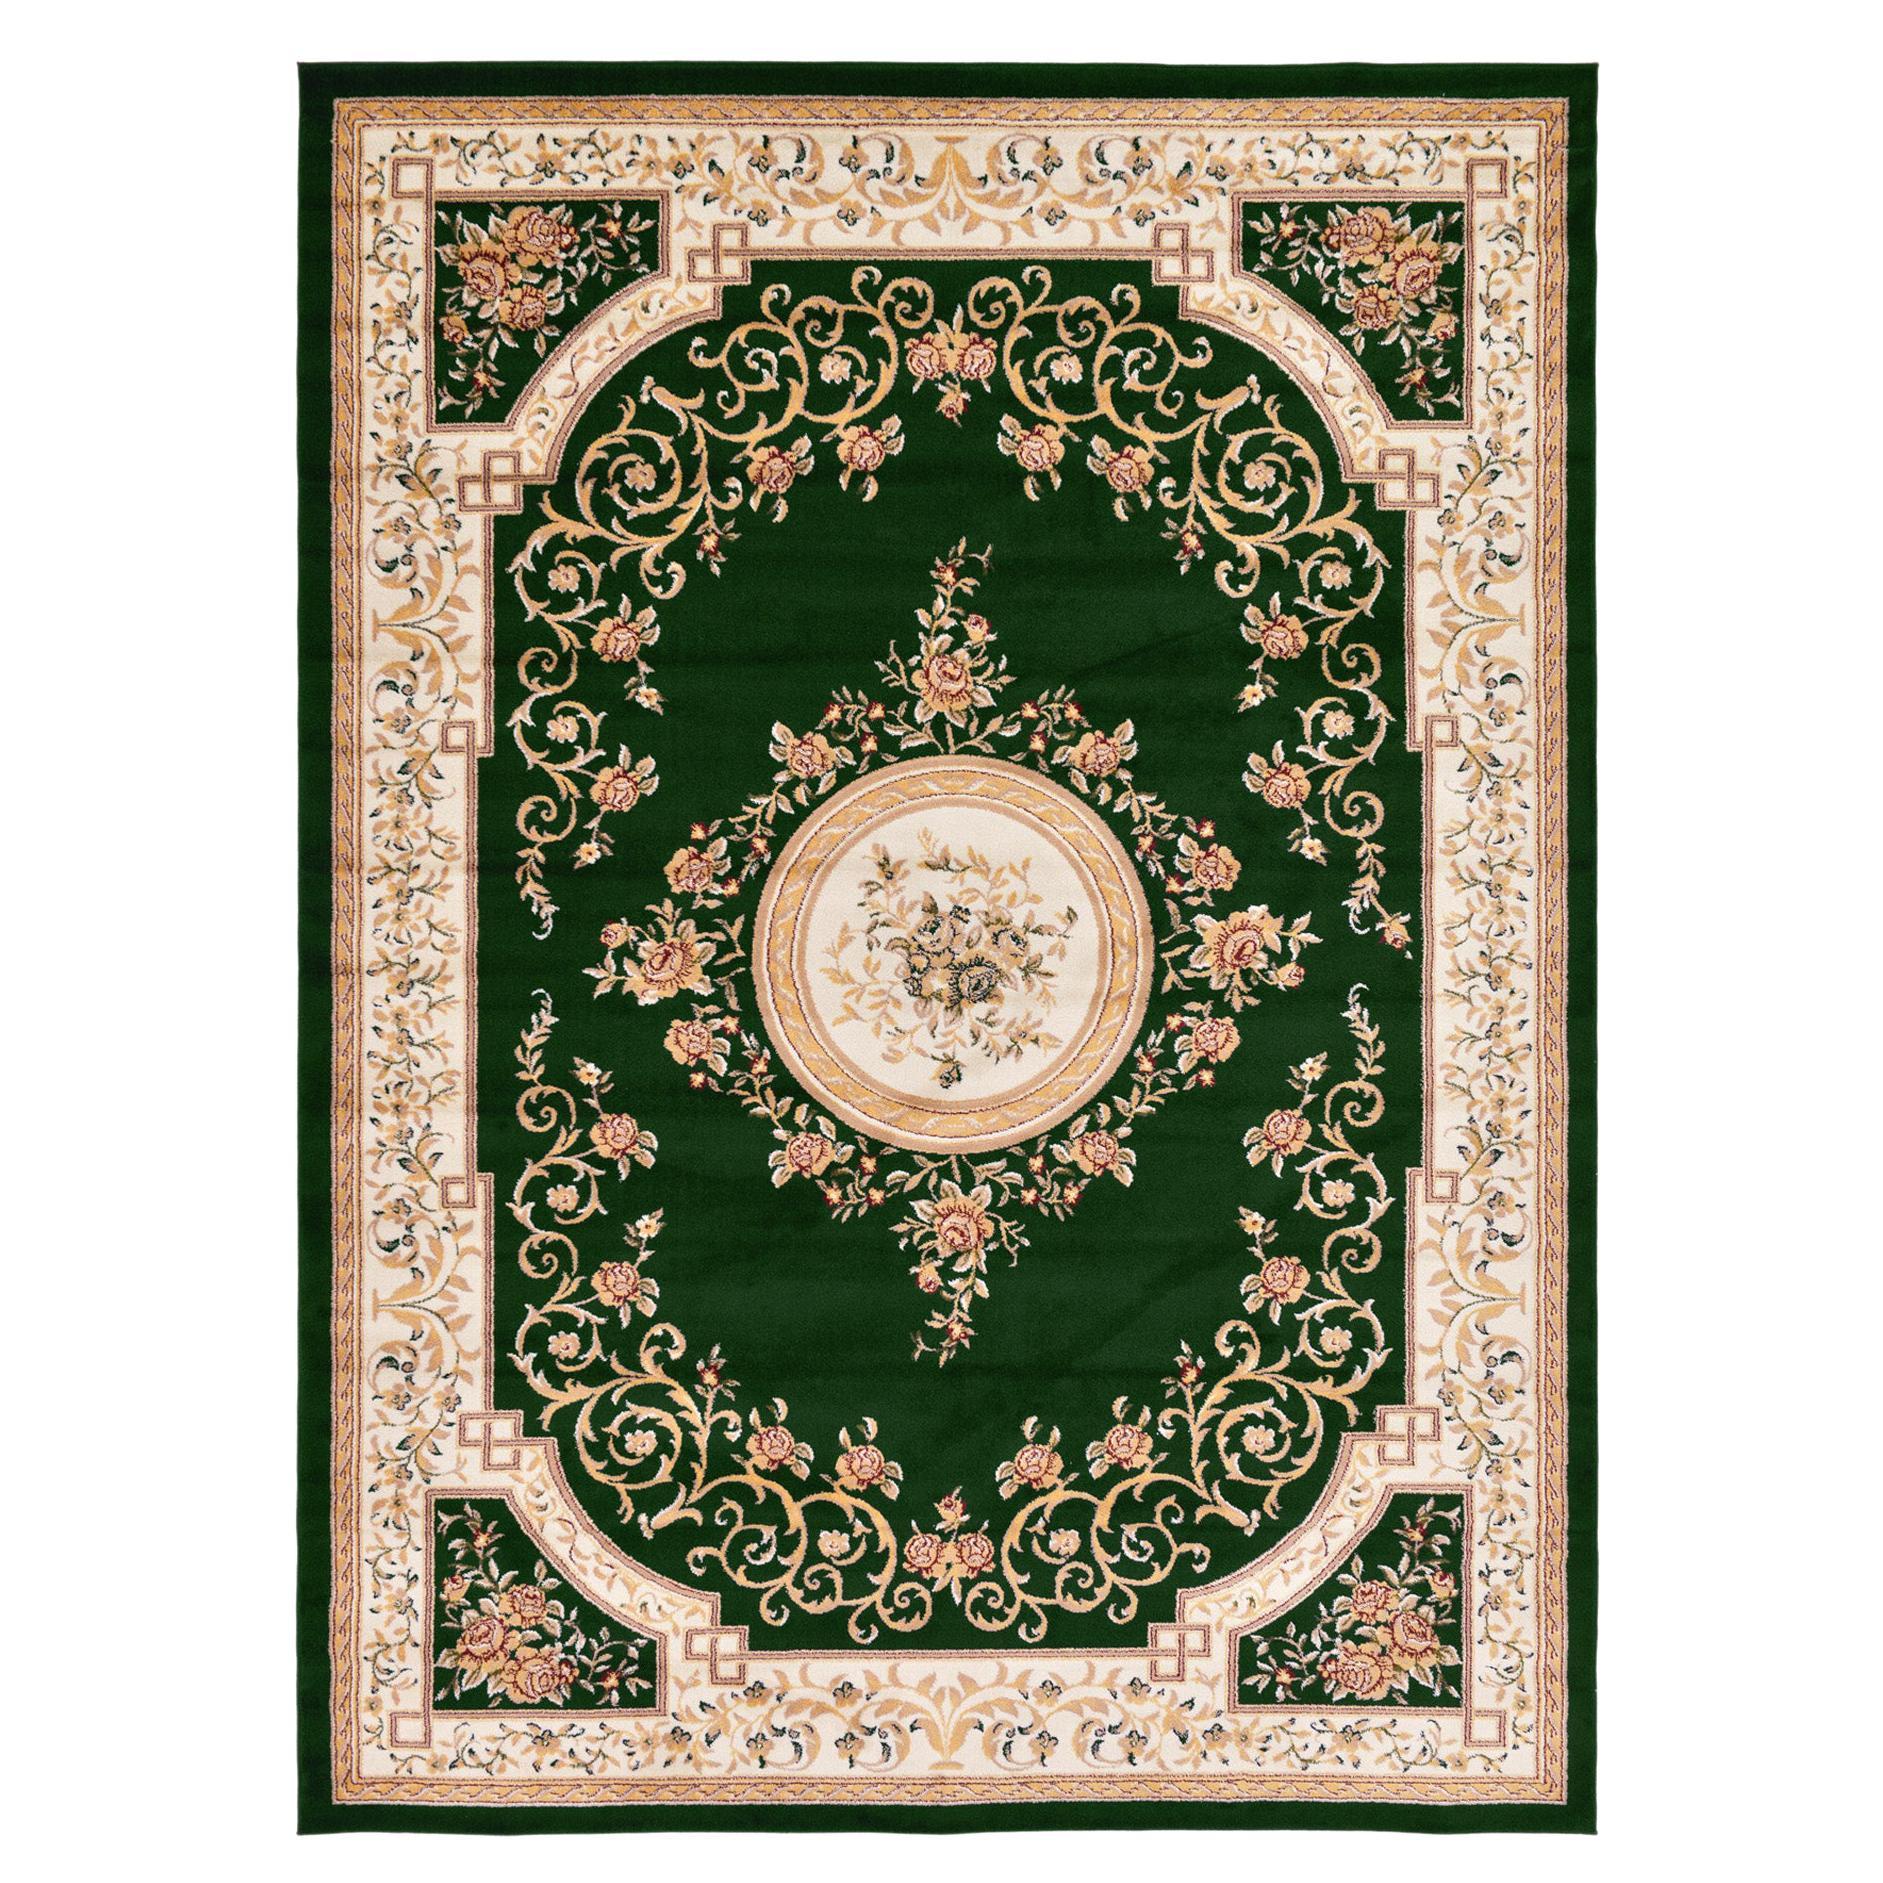 21st Century Bamboo Silk Handknotted Rug by Modenese Interiors, Green&White